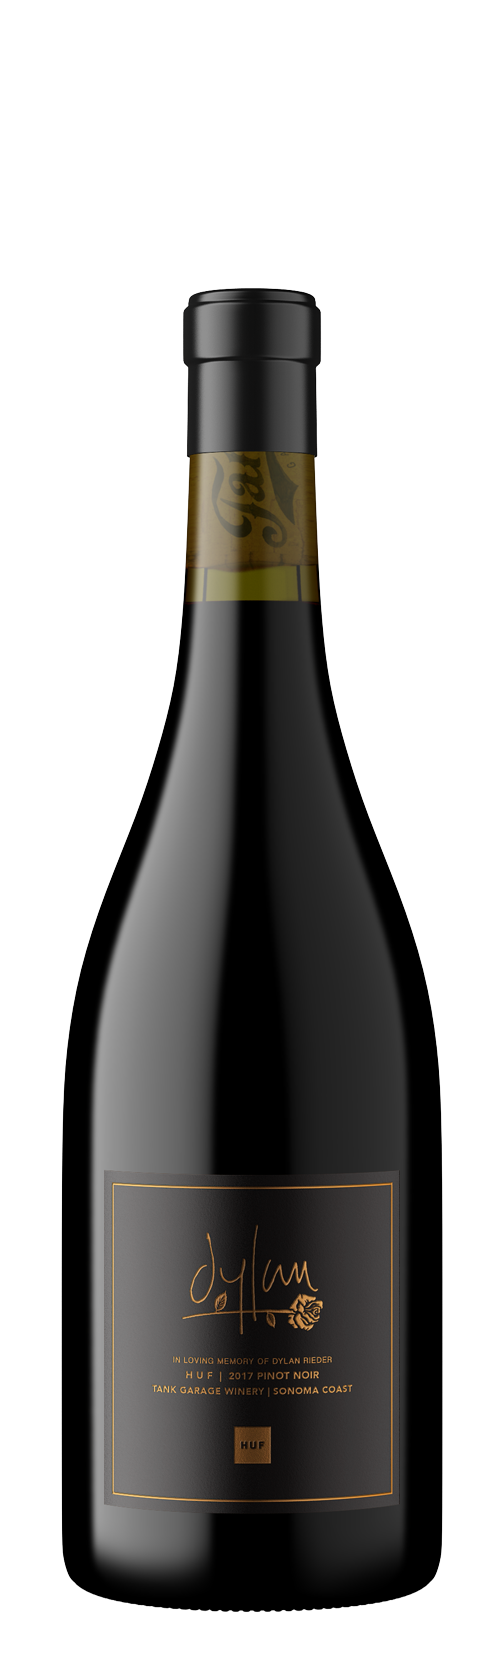 https://www.tankgaragewinery.com/assets/client/Image/Dylan.Thumbnail.png